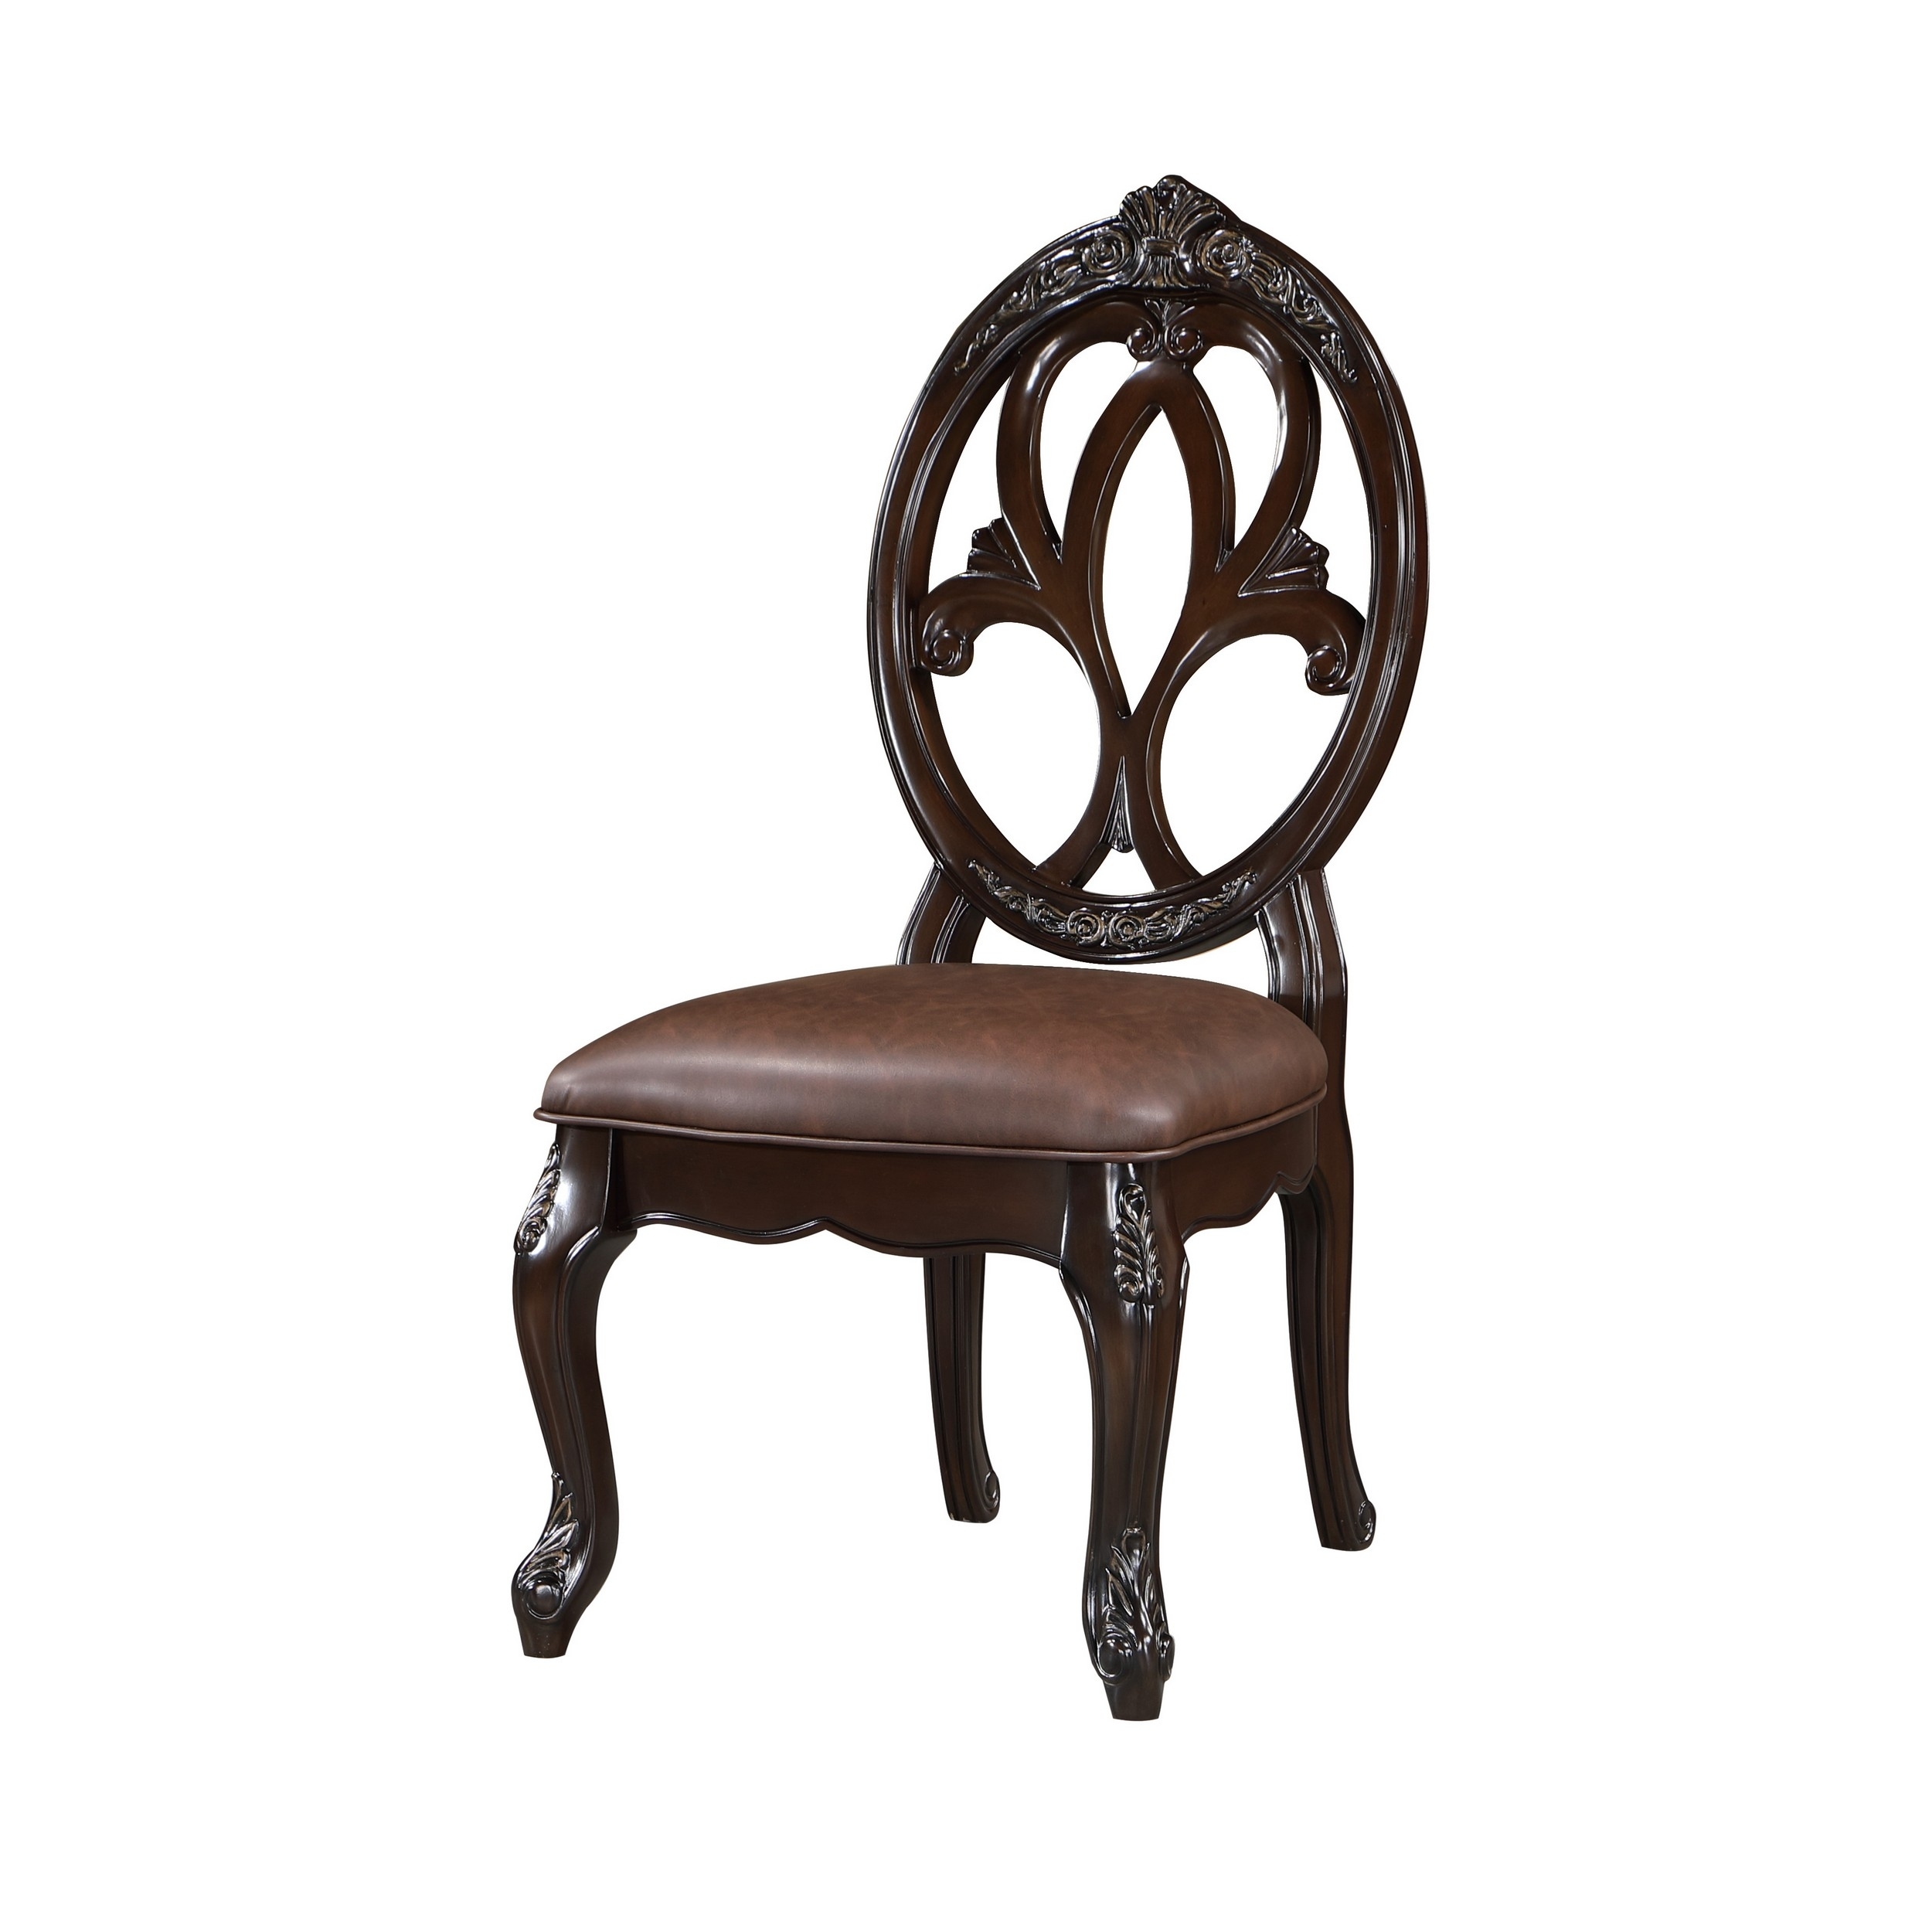 Cran 21 Inch Dining Side Chair, Carved Details, Faux Leather Seat, Brown - Saltoro Sherpi